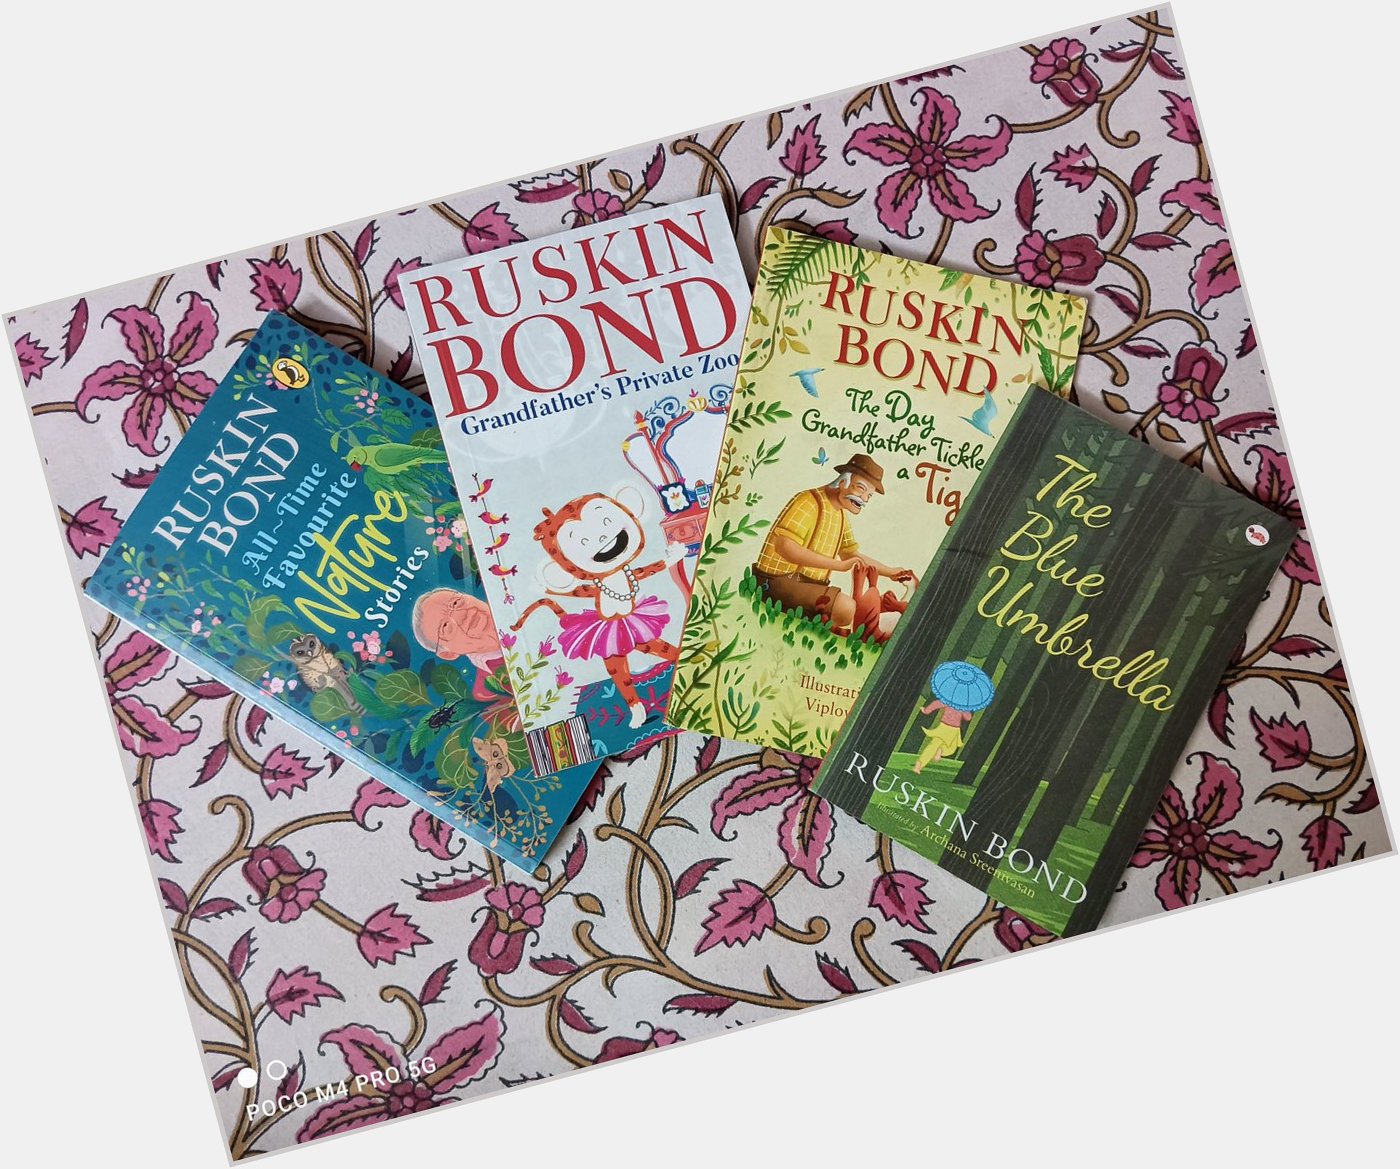  From my son\s collection. Happy birthday Ruskin Bond! My son\s hero!! 